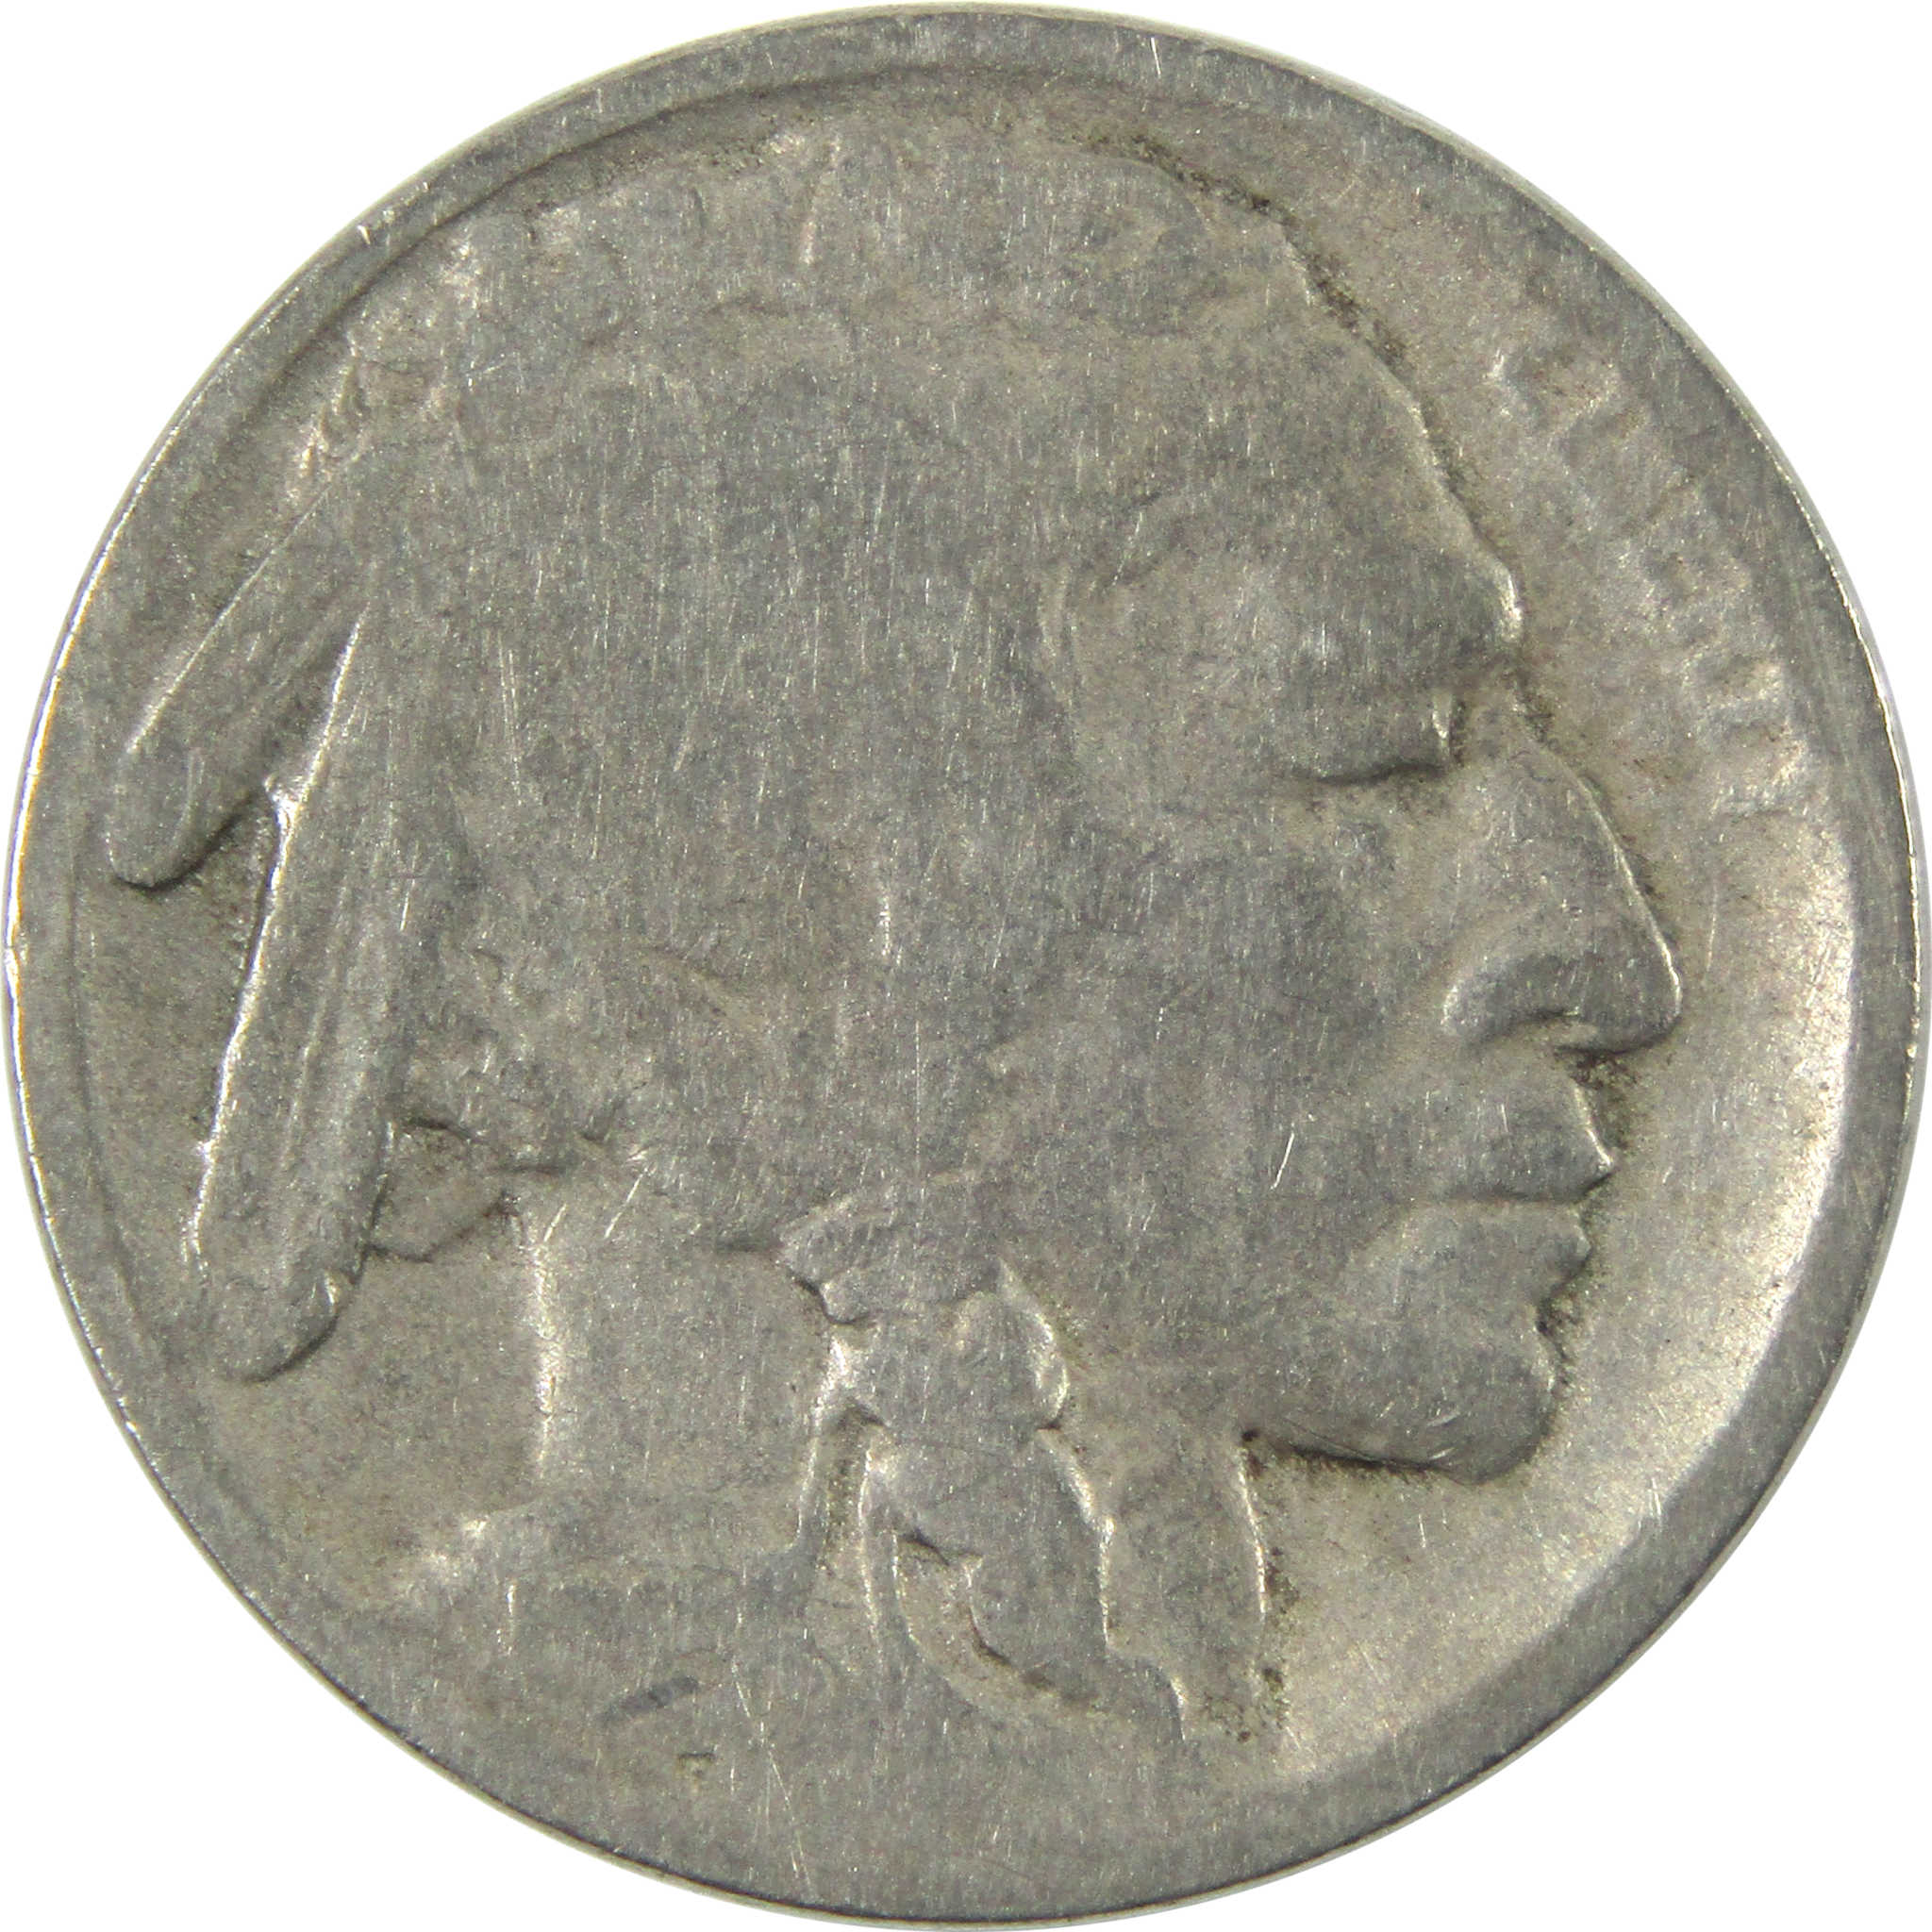 1915 S Indian Head Buffalo Nickel AG About Good 5c Coin SKU:CPC4703